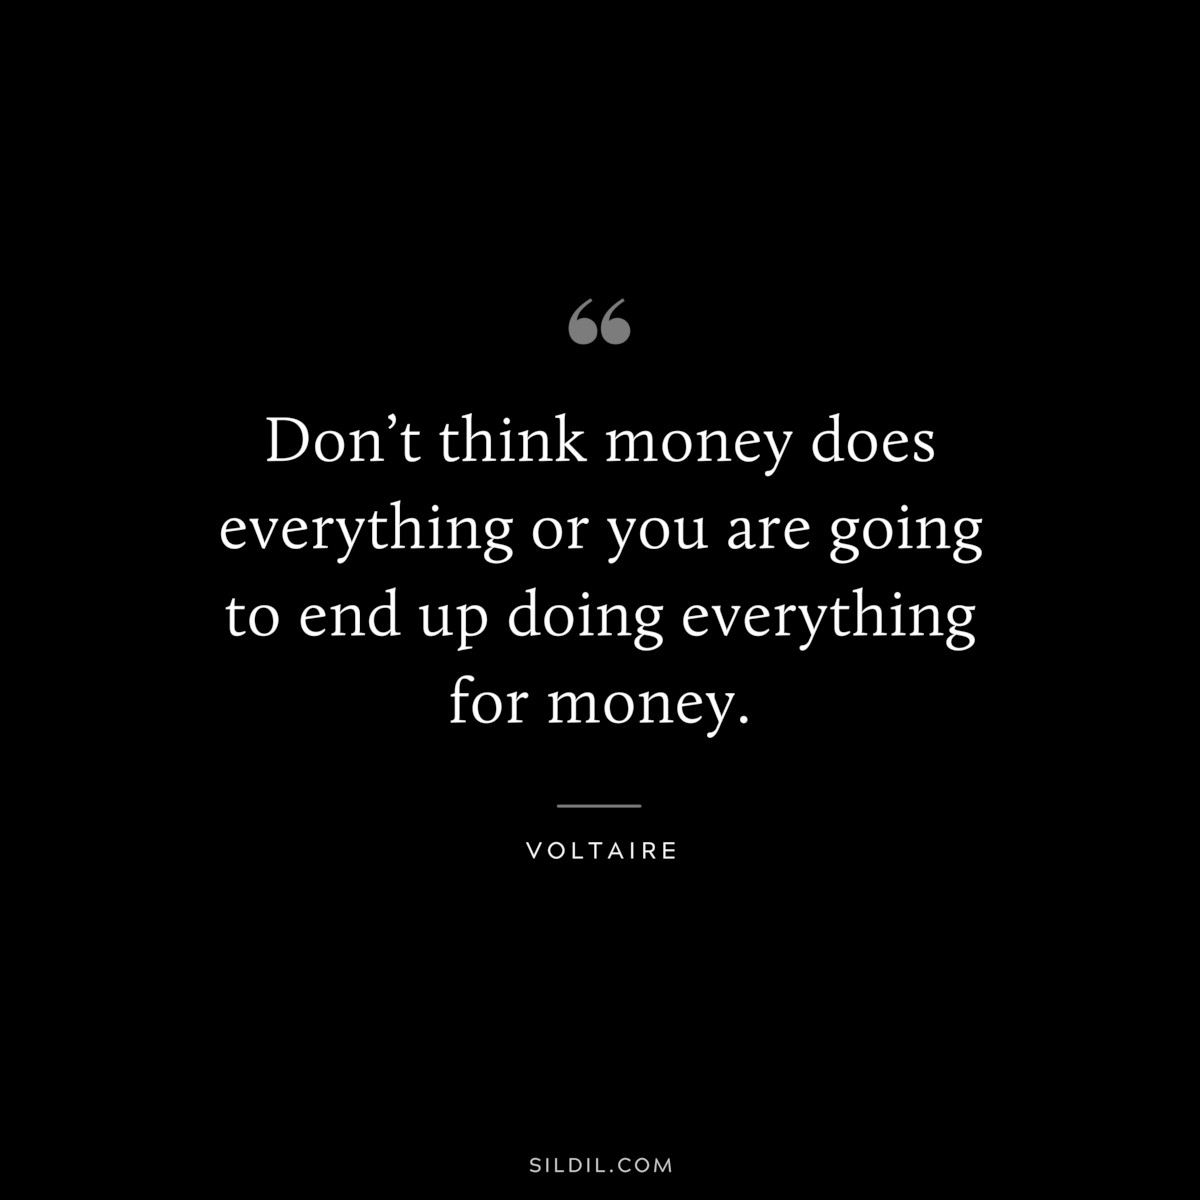 Don’t think money does everything or you are going to end up doing everything for money. ― Voltaire